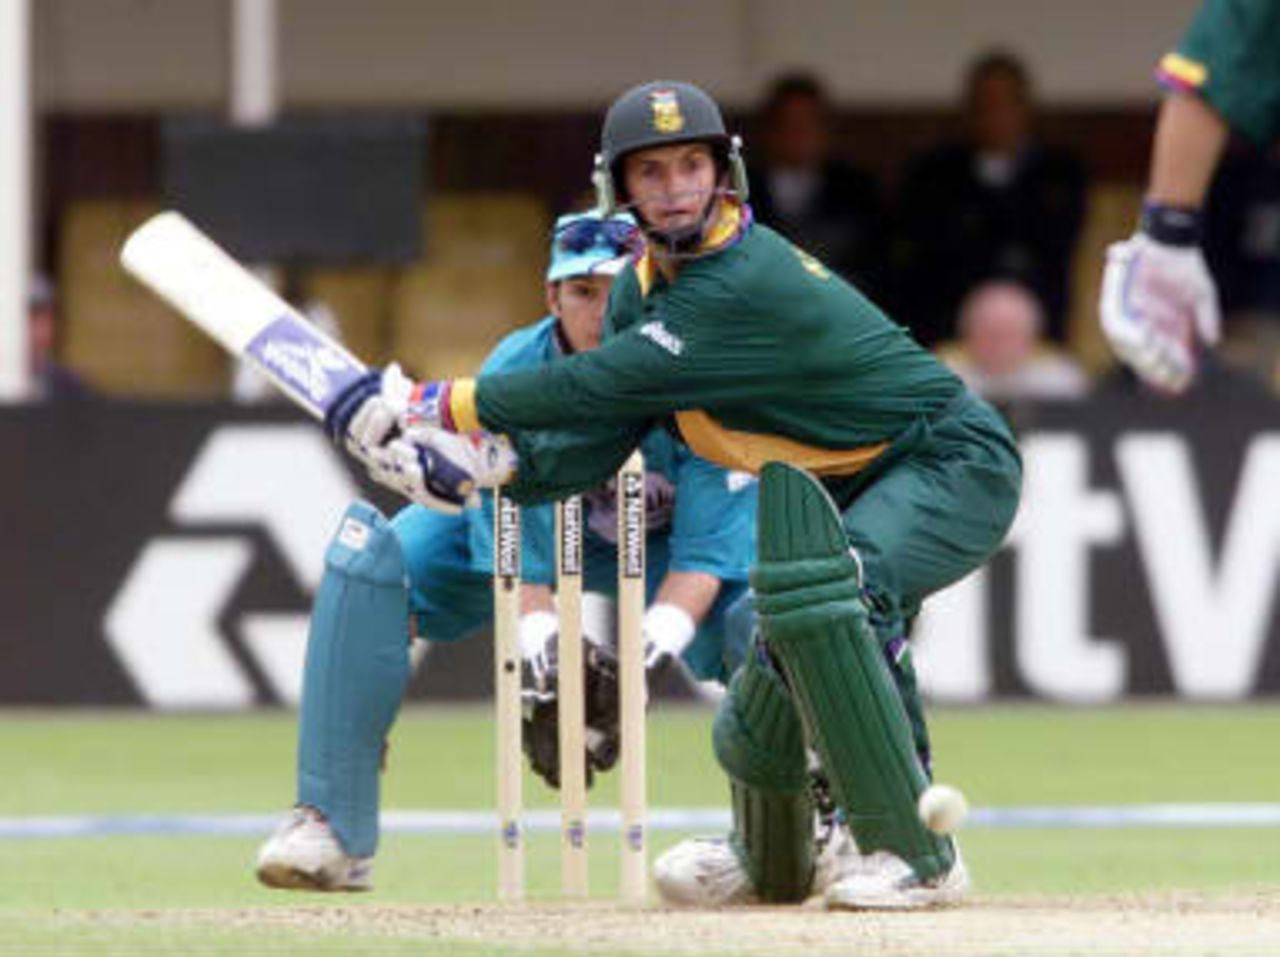 South Africa's Gary Kirsten plays a reverse sweep shot on his way to making 82 runs 10 June 99, during their Super Six match in the Cricket World Cup at Edgbaston, Birmingham